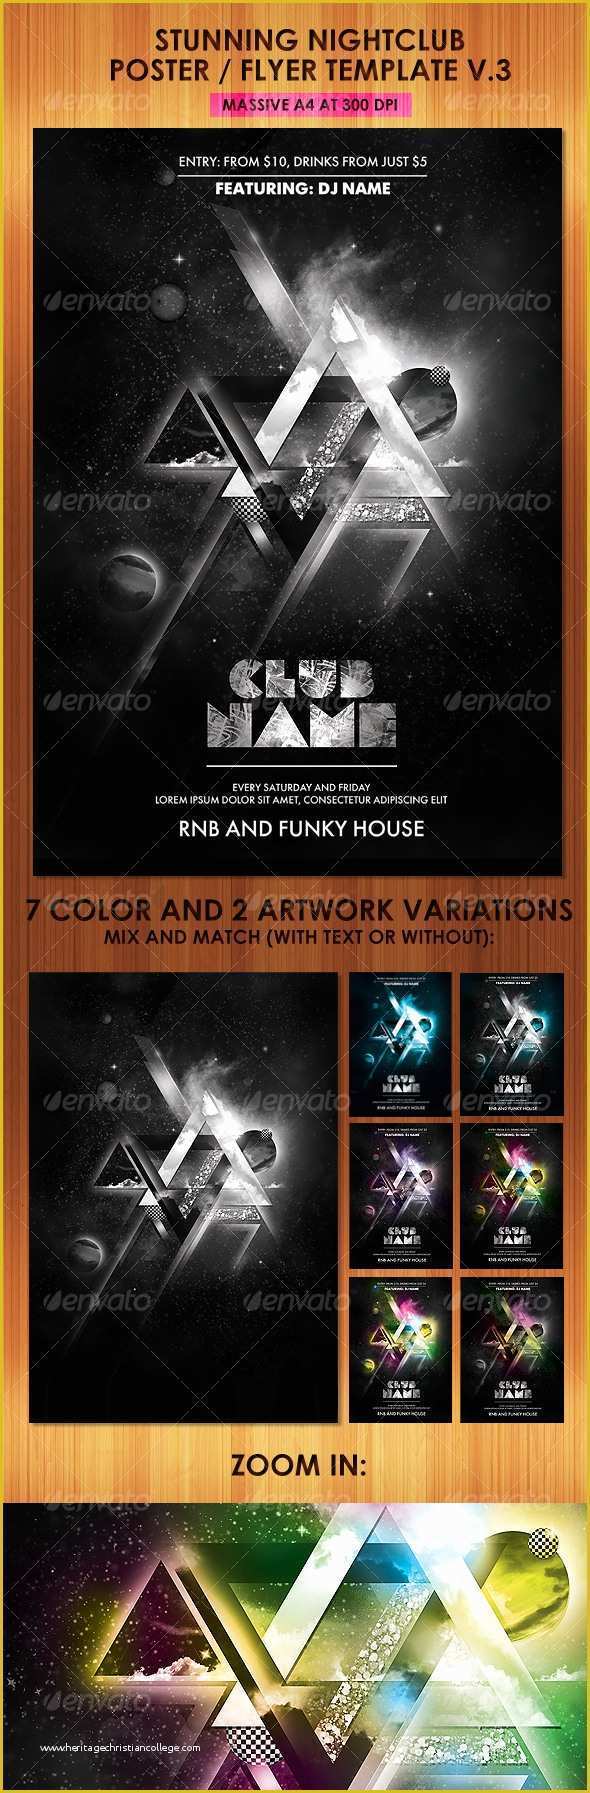 Free Online Poster Maker Templates Of Stunning Nightclub Poster Flyer Template V Print Templates